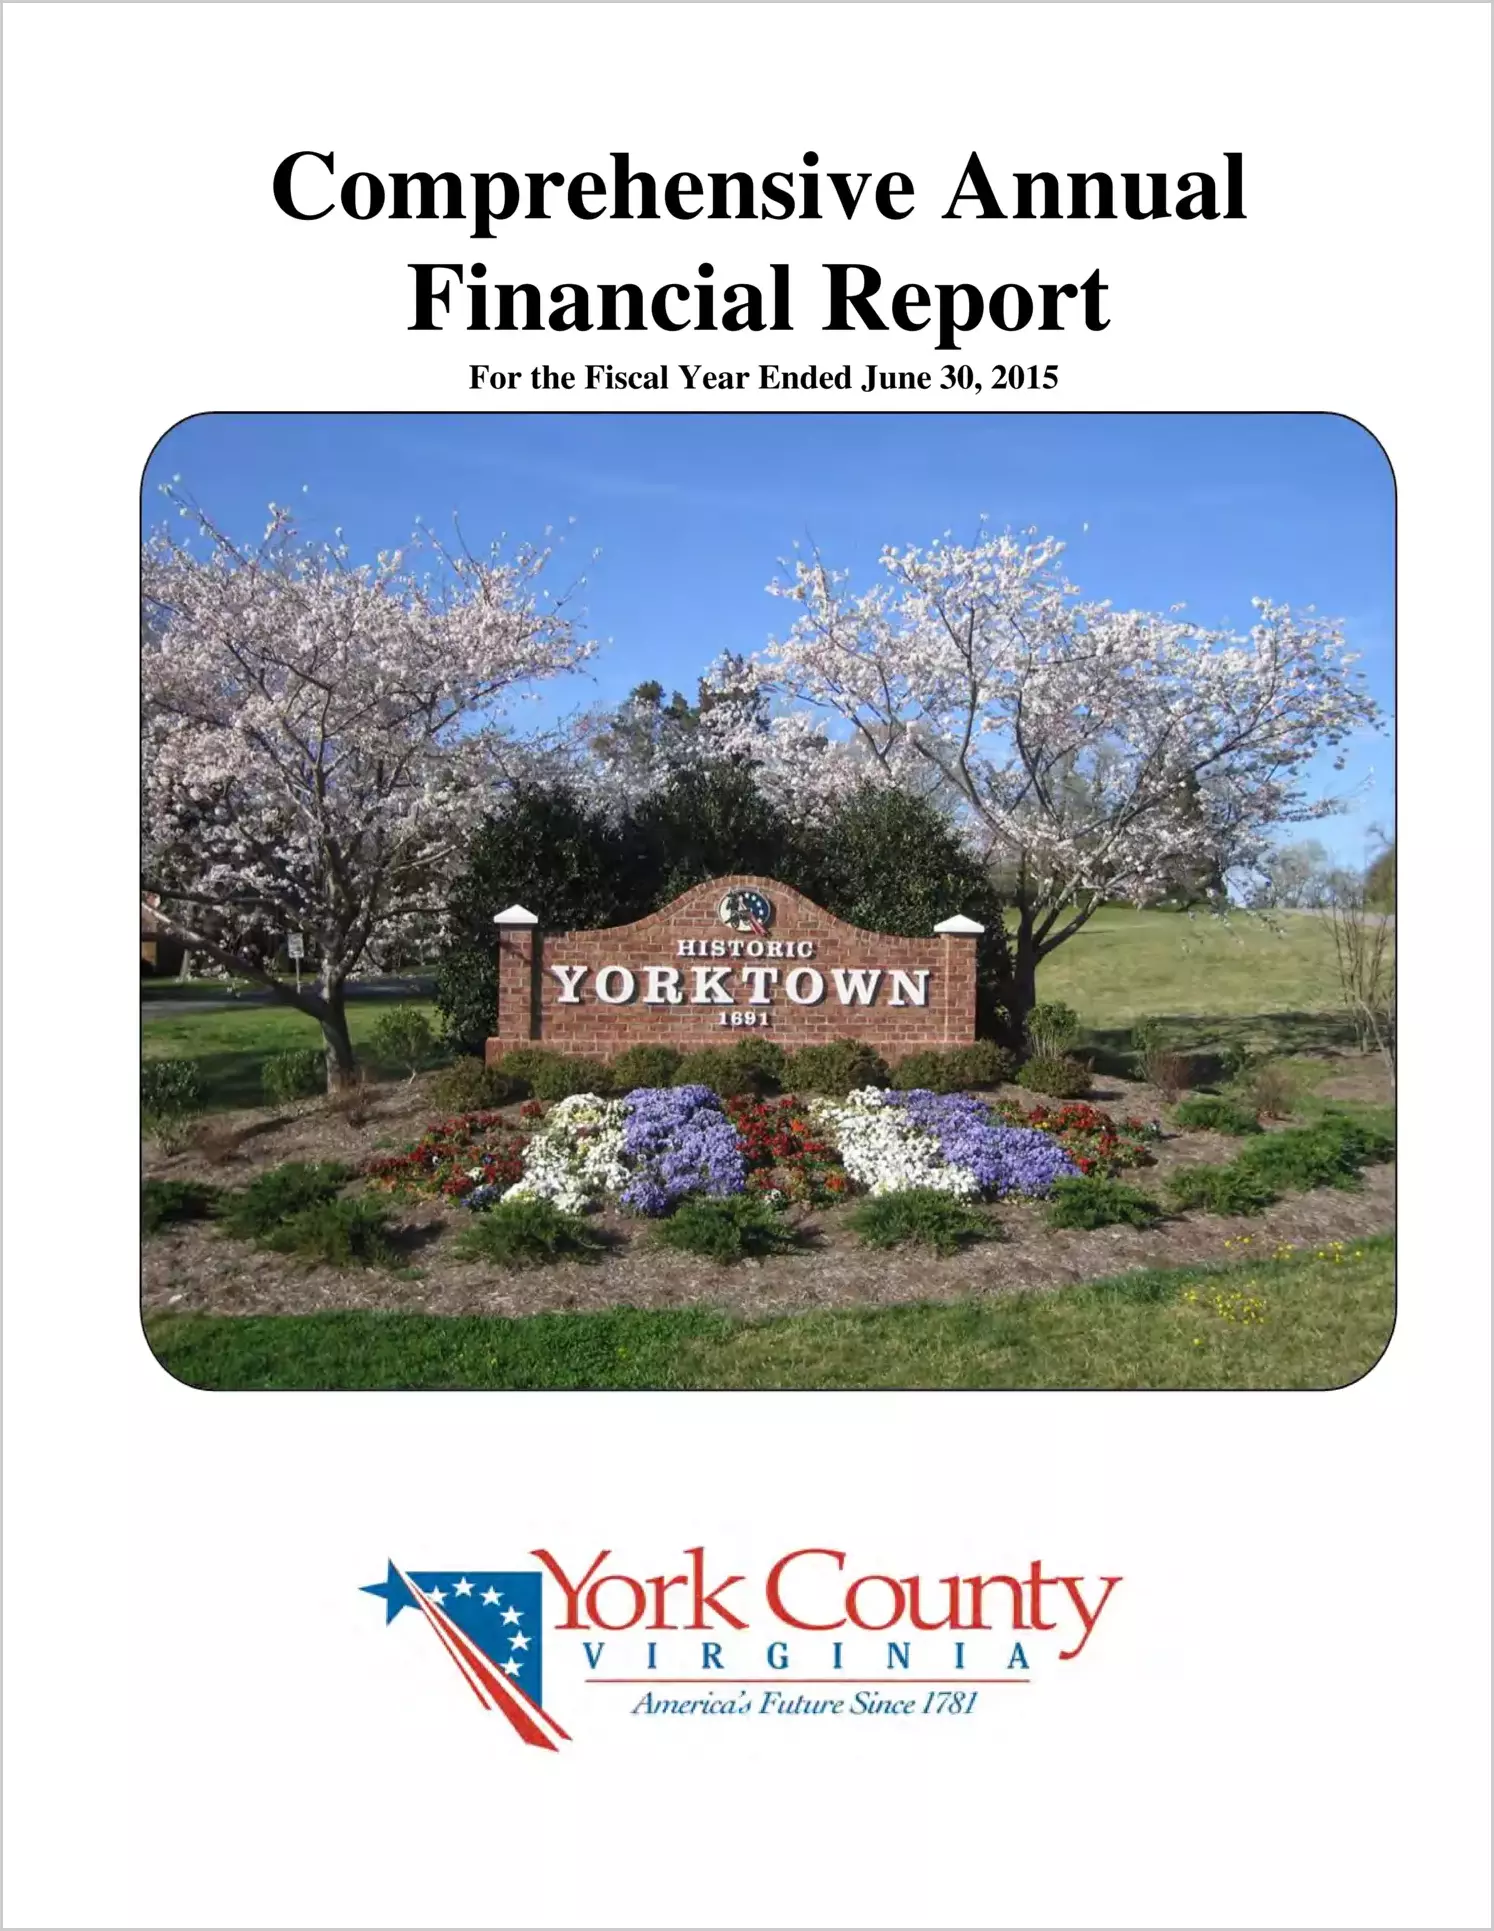 2015 Annual Financial Report for County of York